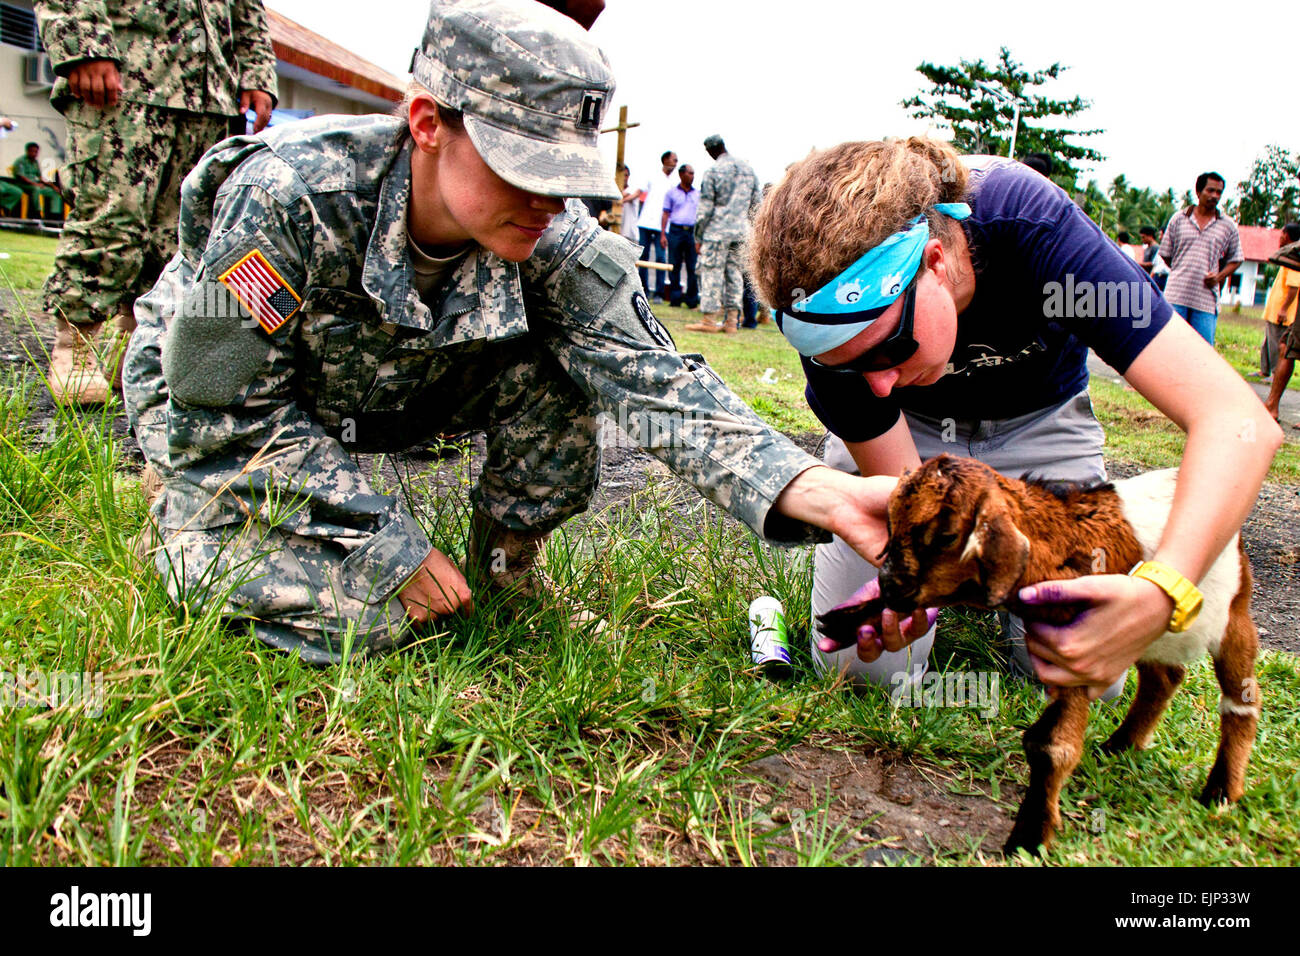 Army Capt. Shannon McLean and Helle Hydeskov, a World Vets volunteer veterinarian, examine a baby goat’s leg as part of a veterinary civic action project during Pacific Partnership 2012. Now in its seventh year, Pacific Partnership is an annual U.S. Pacific Fleet humanitarian and civil assistance mission U.S. military, host and partner nations, non-governmental organizations and international agencies designed to build stronger relationships and disaster response capabilities in the Asia-Pacific region.  Camelia Montoy Stock Photo